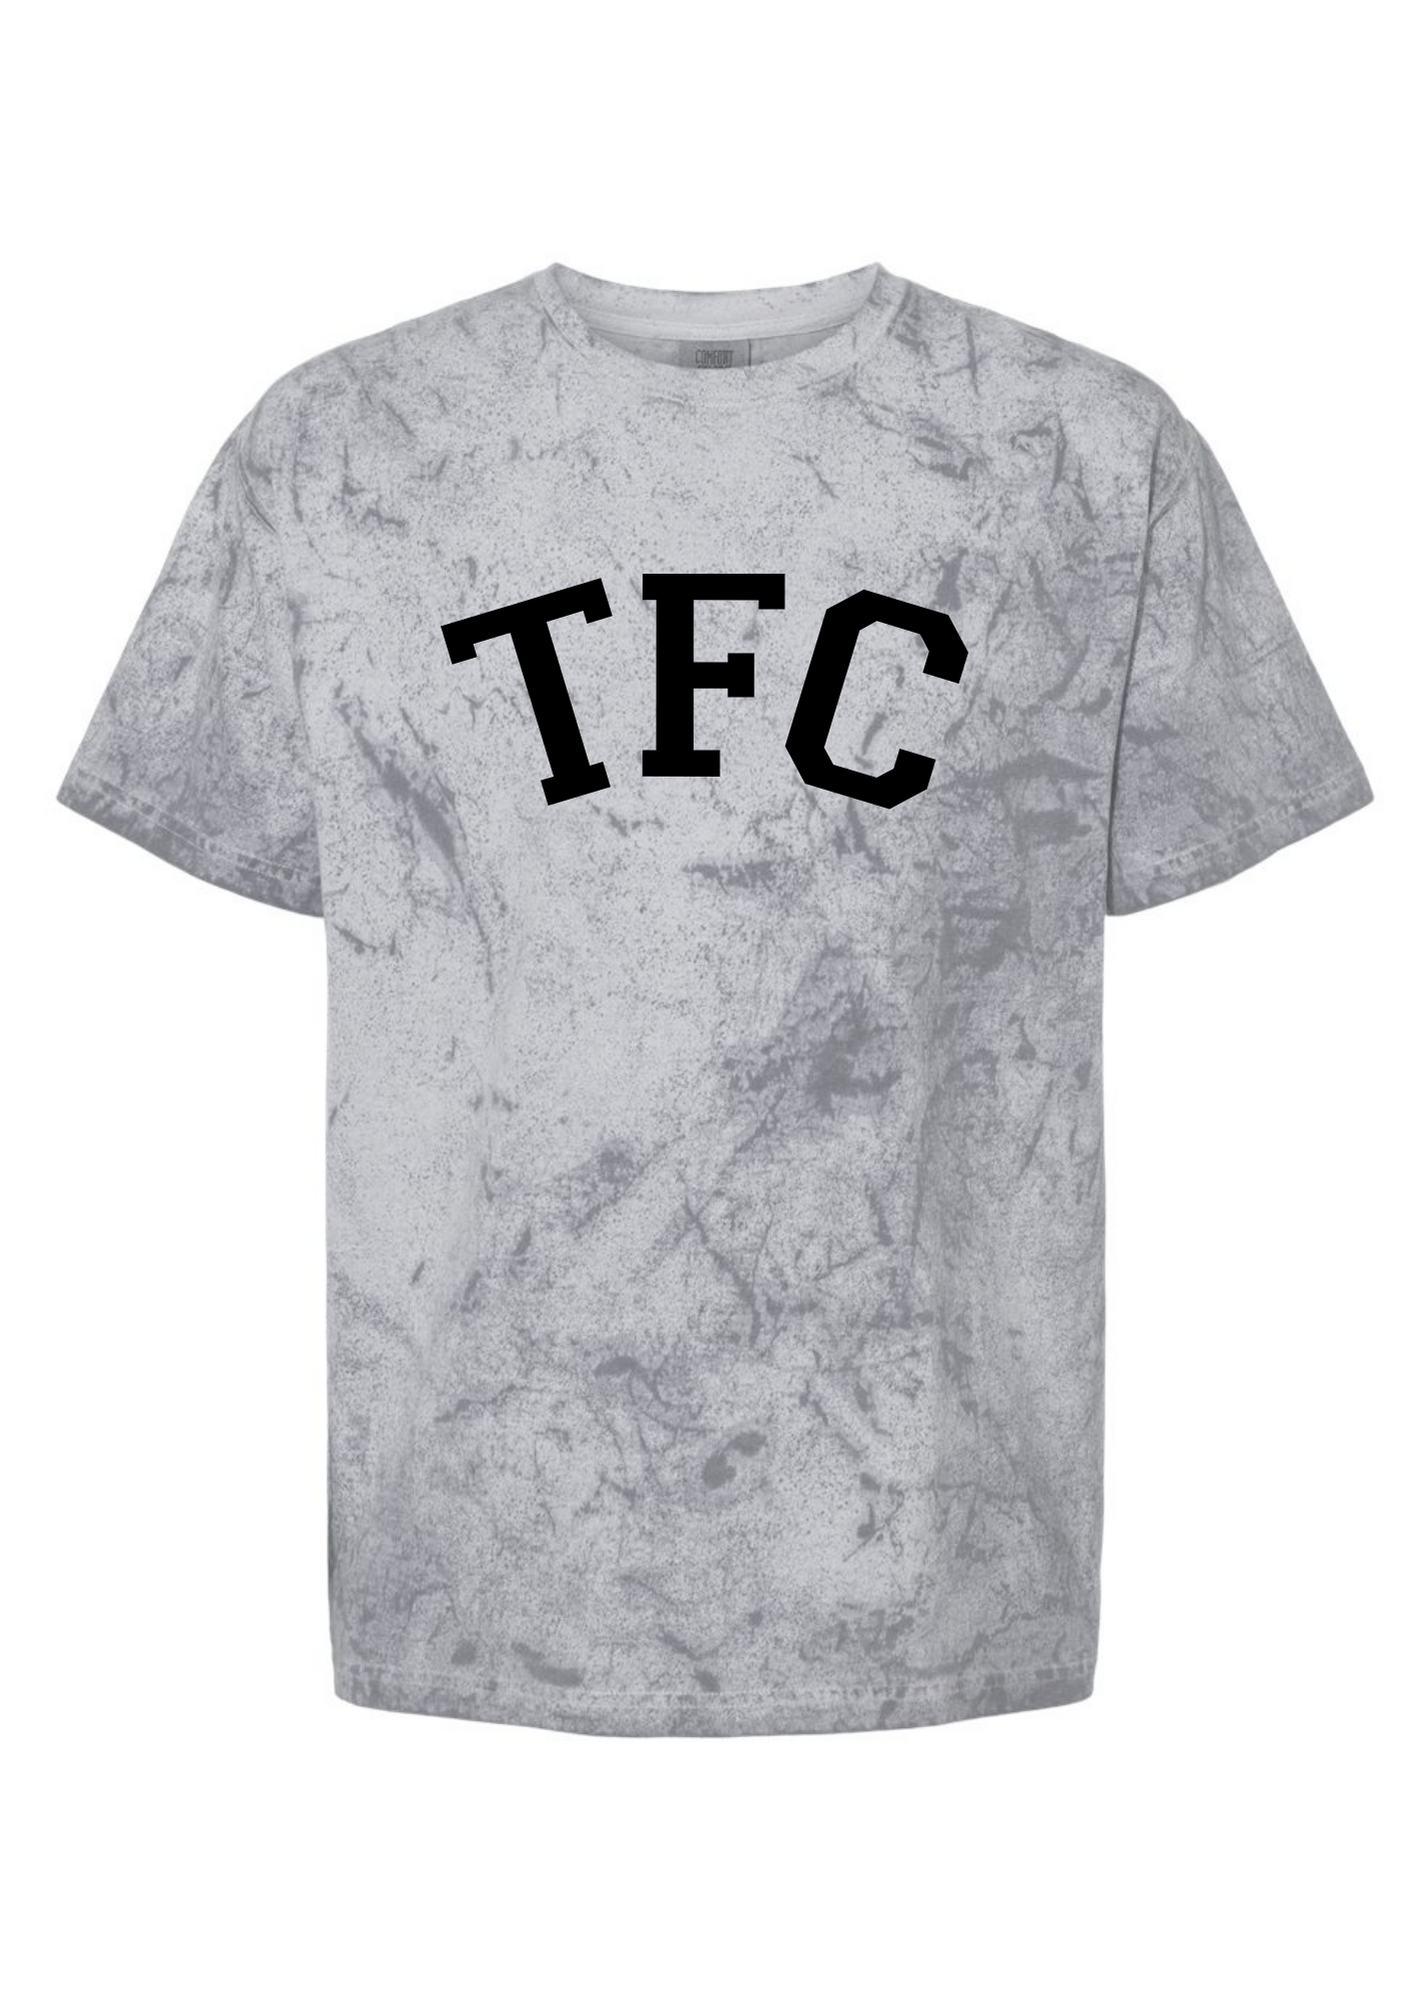 TFC Foil | Colorblast | Tee | Adult-Sister Shirts-Sister Shirts, Cute & Custom Tees for Mama & Littles in Trussville, Alabama.